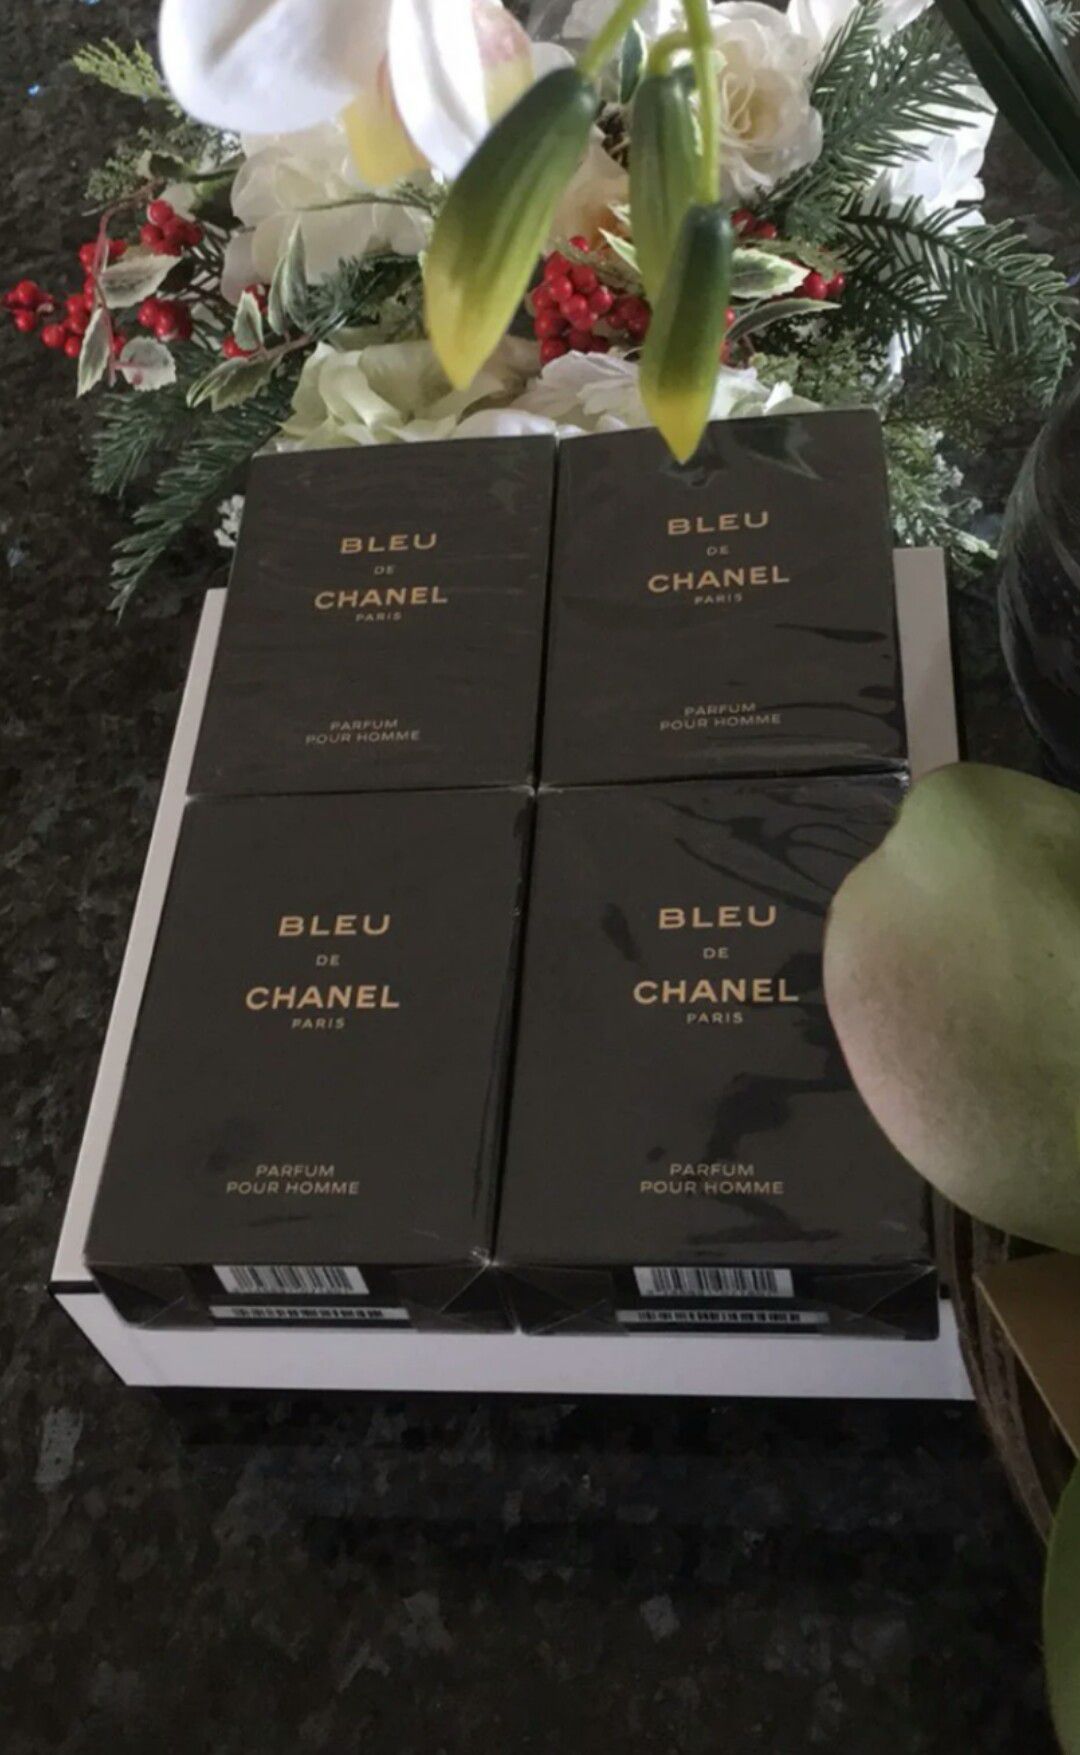 CHANEL BLEU PARFUM POUR HOMME for Sale in San Diego, CA - OfferUp